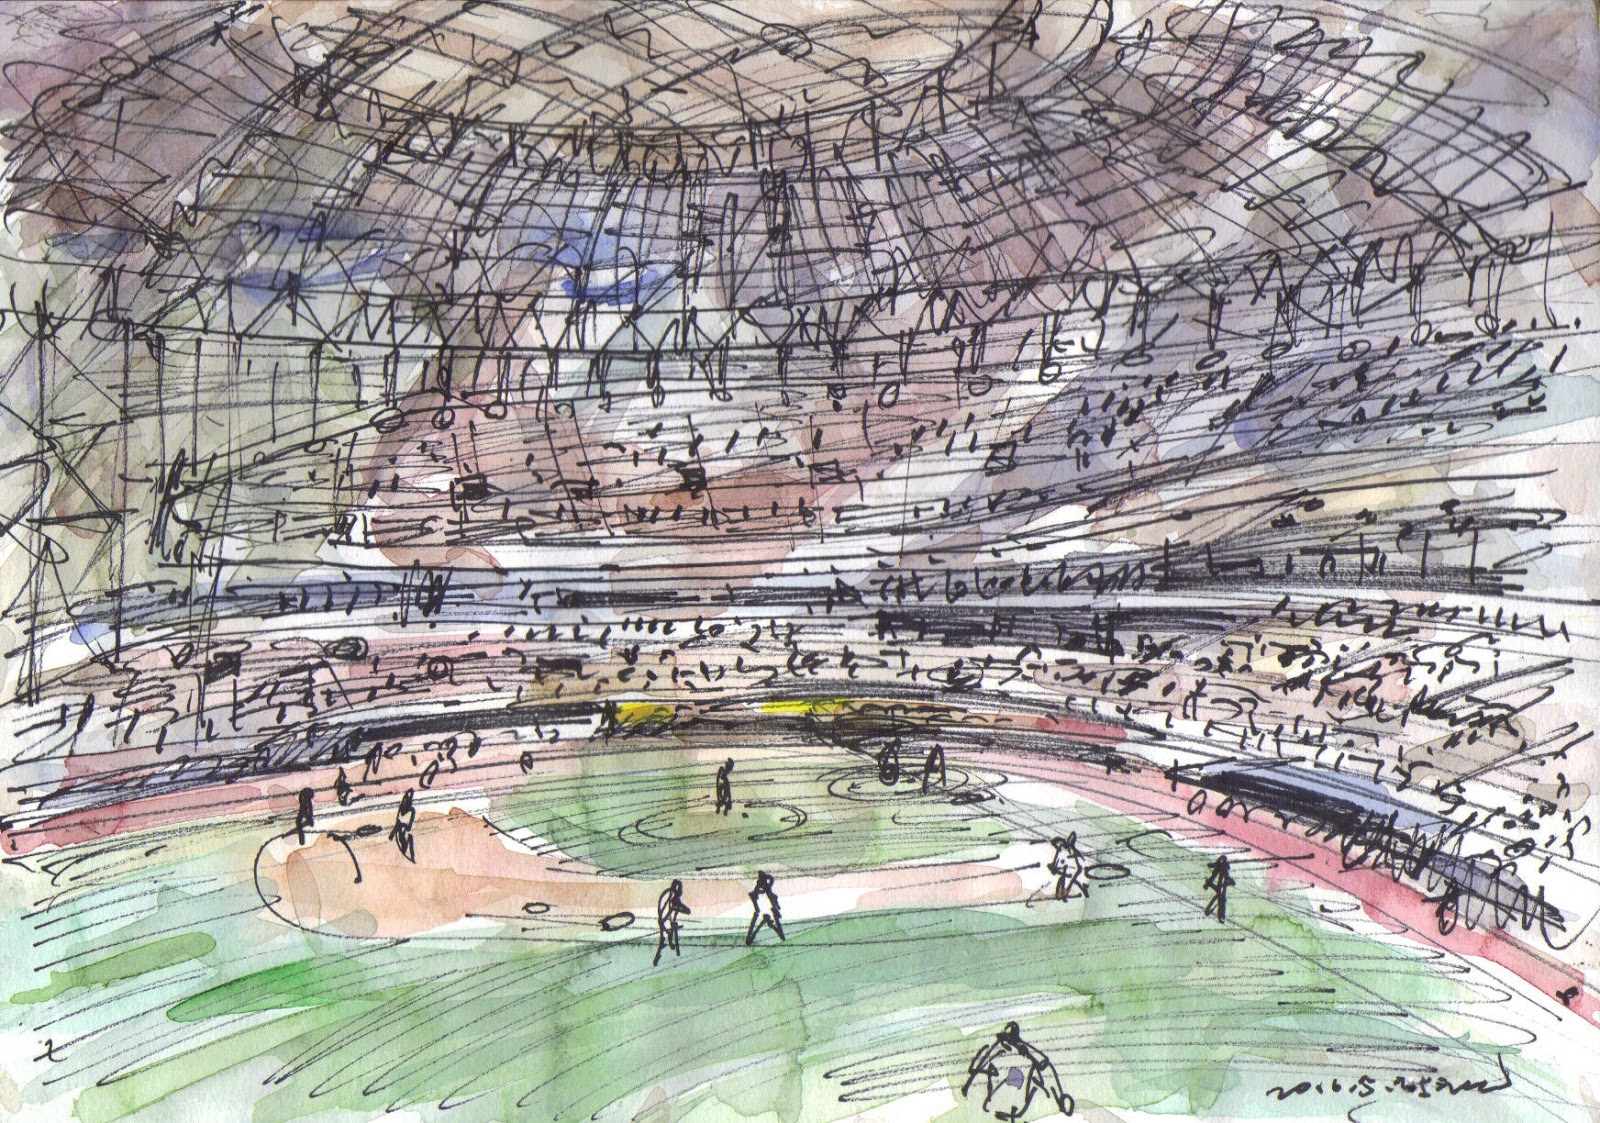 Baseball Stadium Sketch at Explore collection of